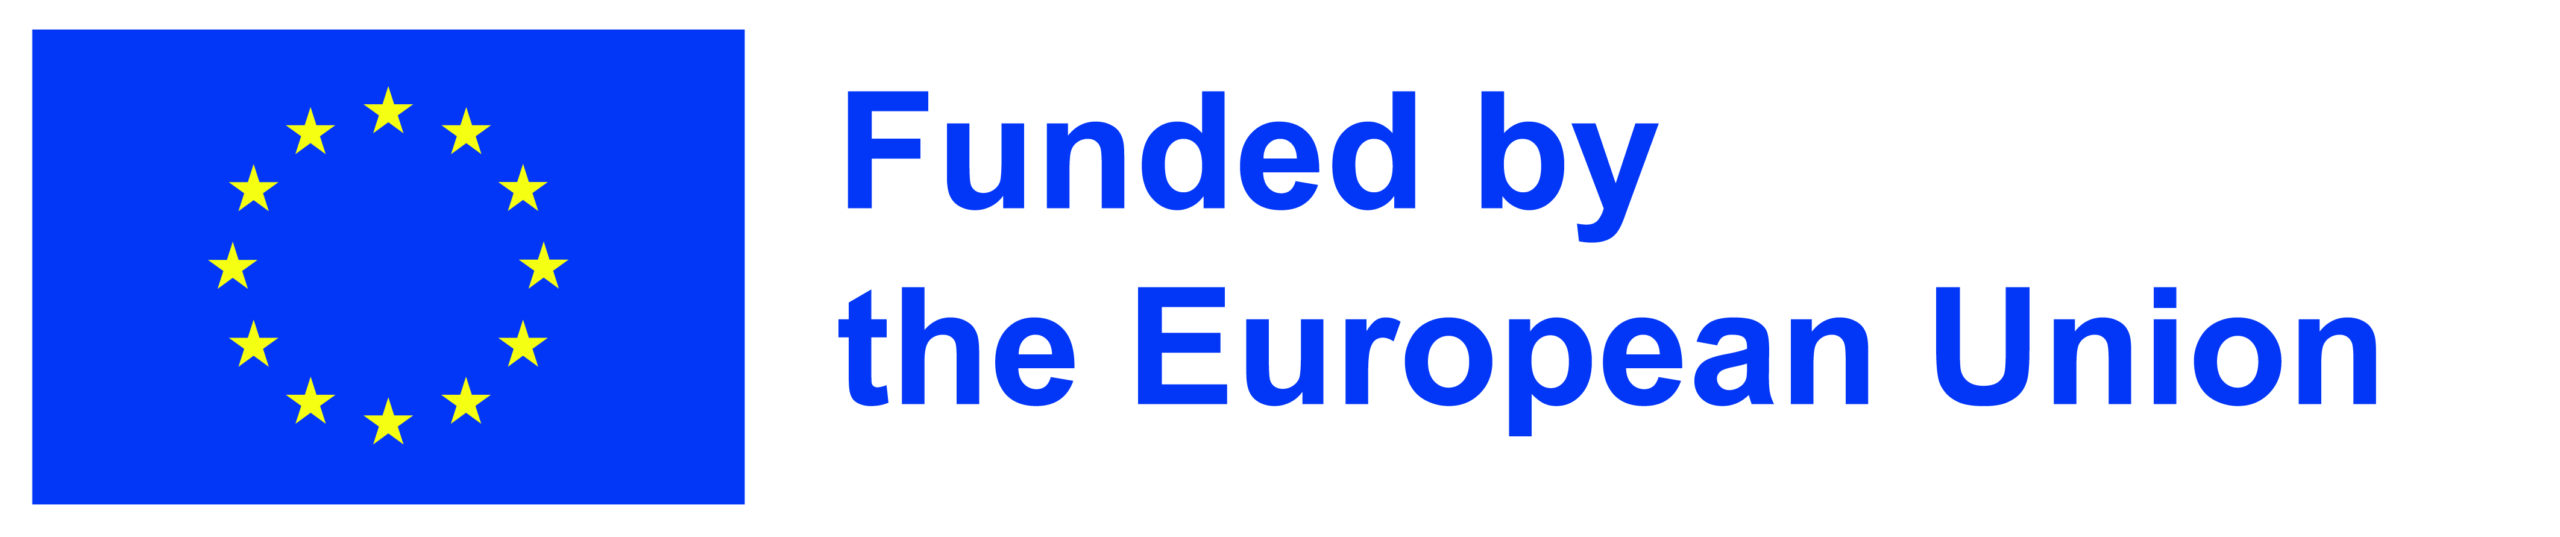 This project has received funding from the European Union’s Horizon Europe research and innovation funding programme under Grant Agreement No 101058449. Grant amount: 4,651,014 euros. Grant for ITENE: 462,125 euros.